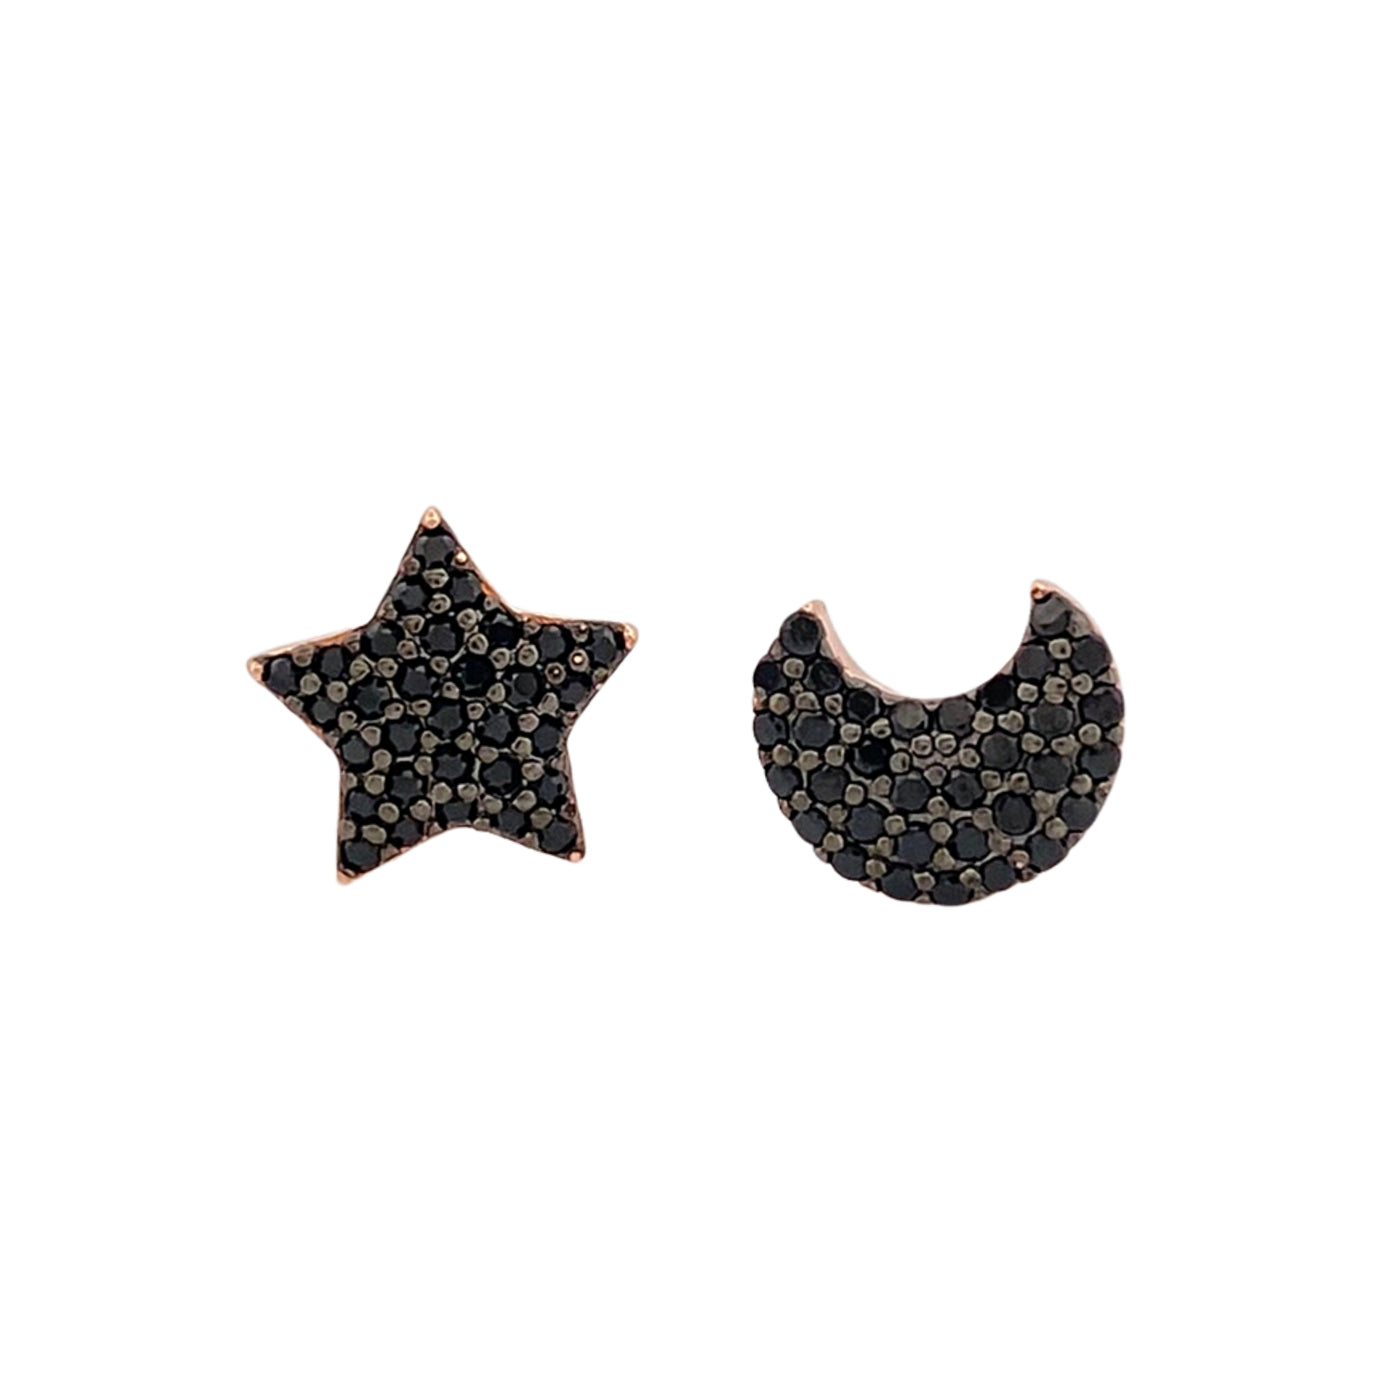 Silver star and moon earrings with cubic zirconia - 8 mm